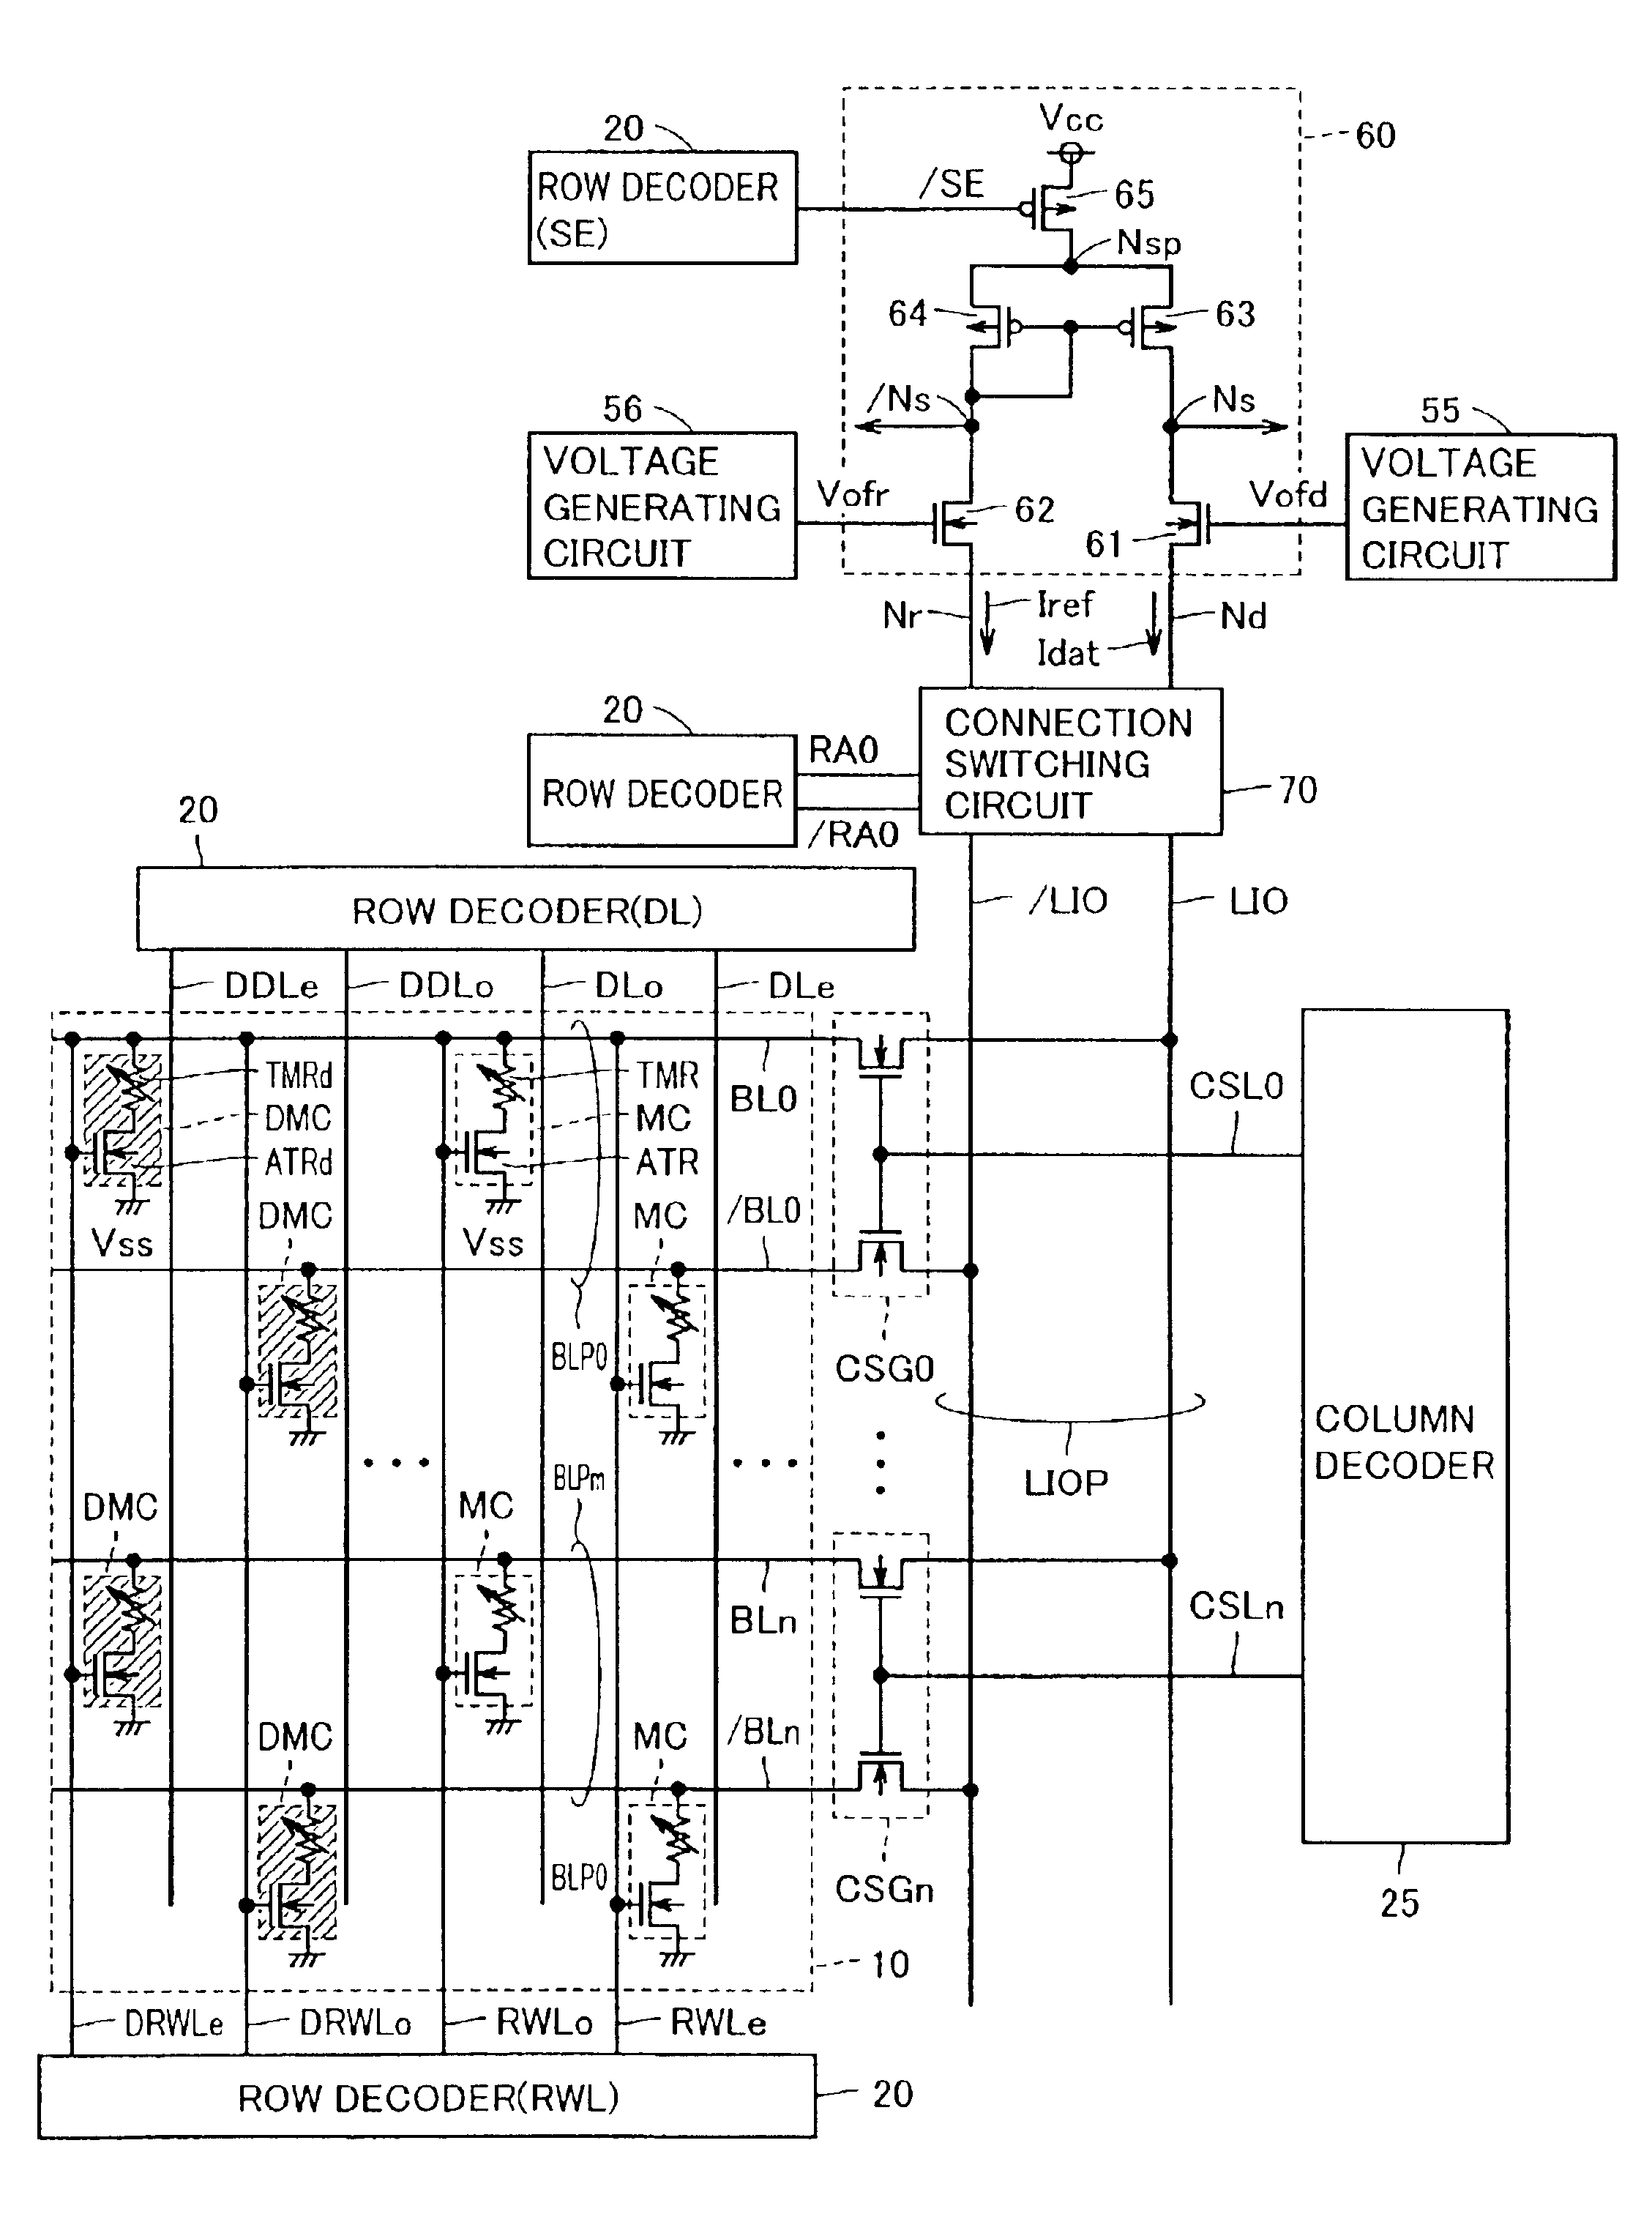 Thin film magnetic memory device provided with a dummy cell for data read reference